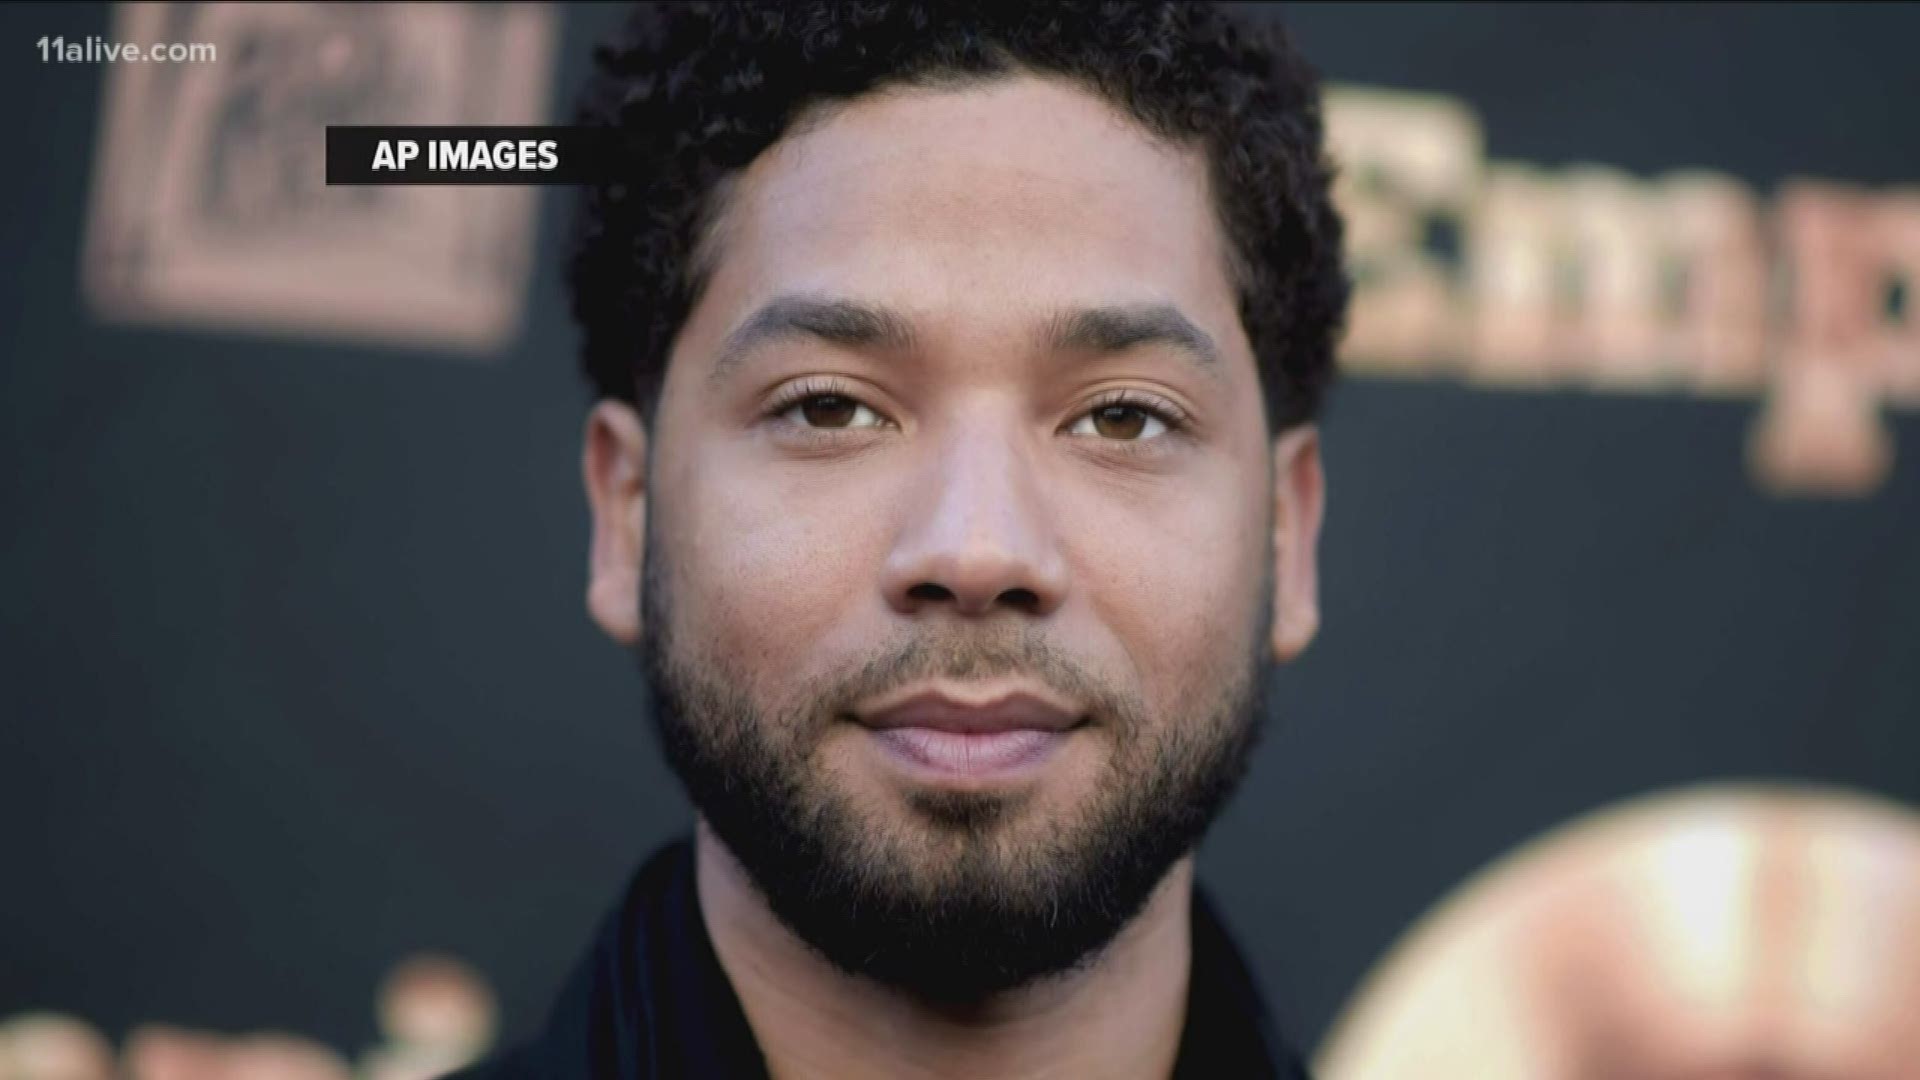 Police spokesman Anthony Guglielmi tweeted the news on Wednesday.  Smollett's attorneys met with prosecutors and detectives.